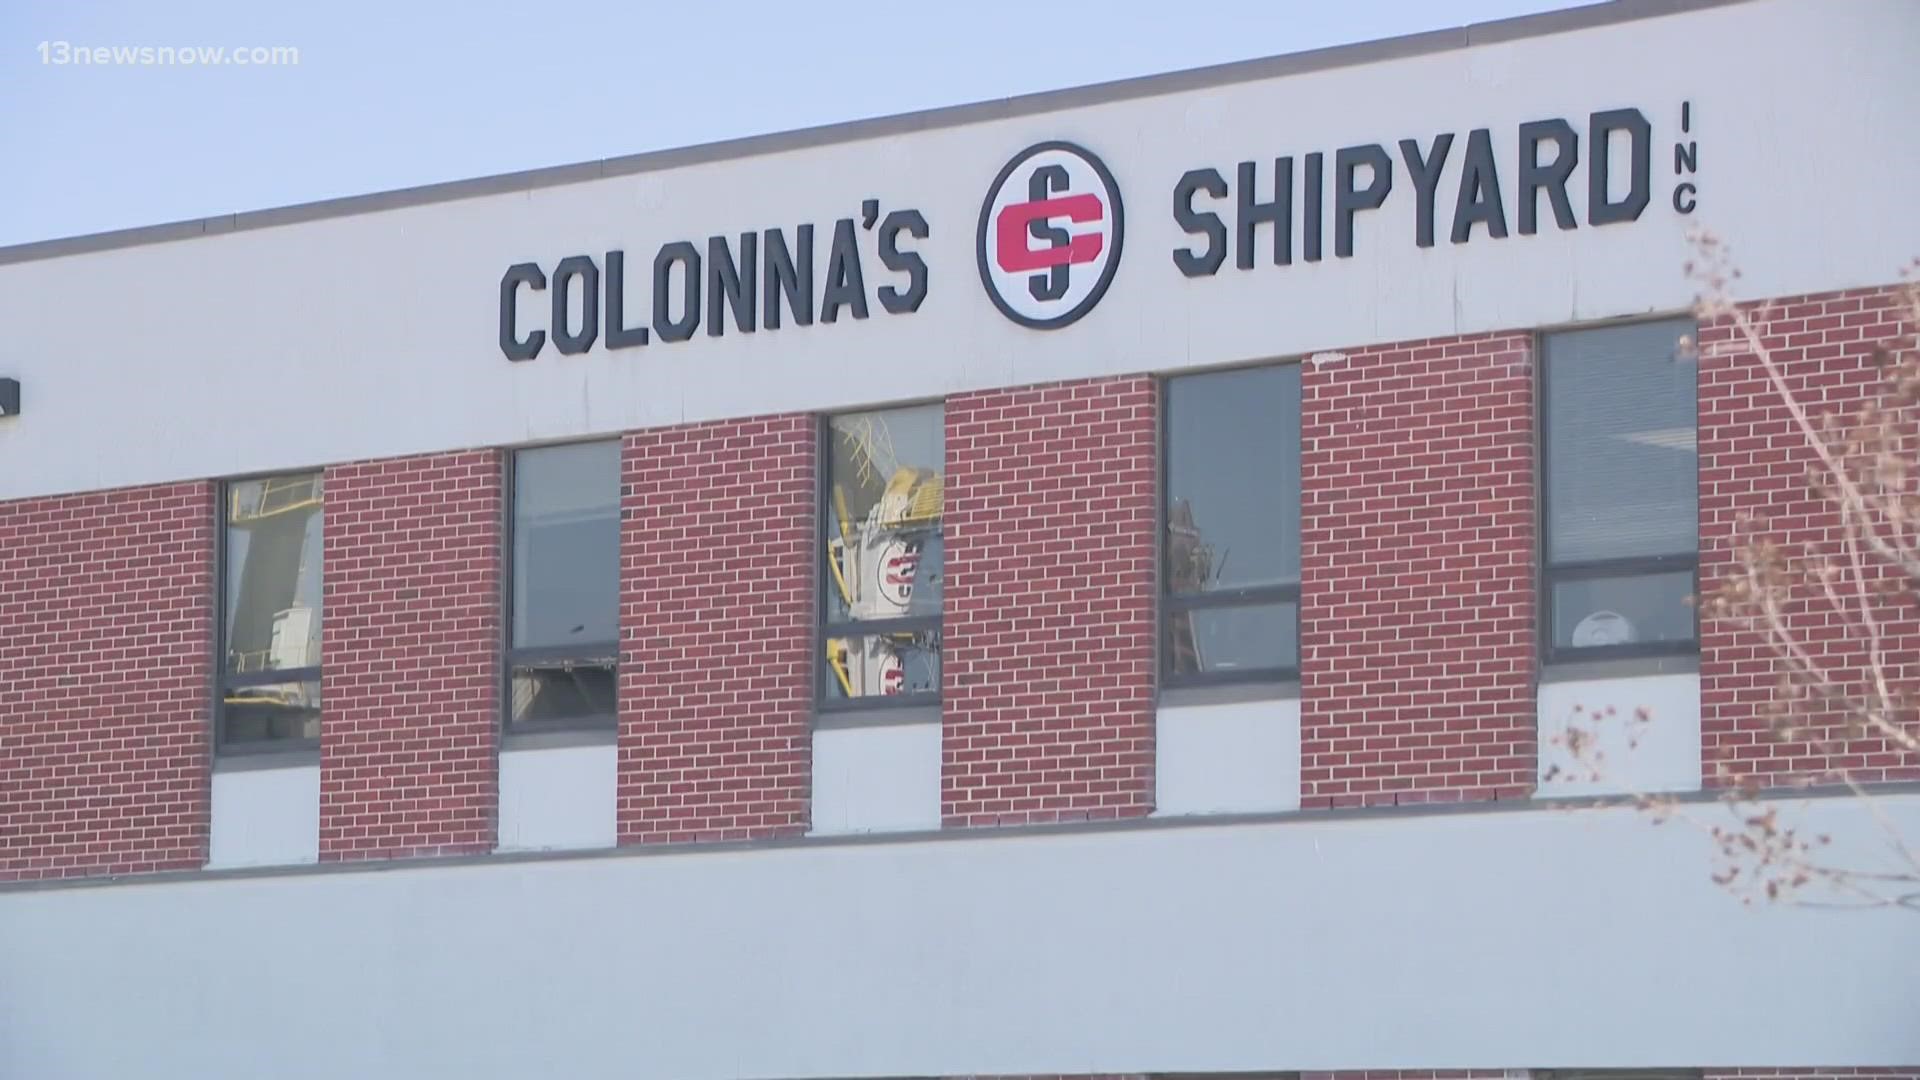 An accident at Colonna's Shipyard in Norfolk left a man seriously hurt Tuesday, and an investigation is underway by the city's fire and rescue department.